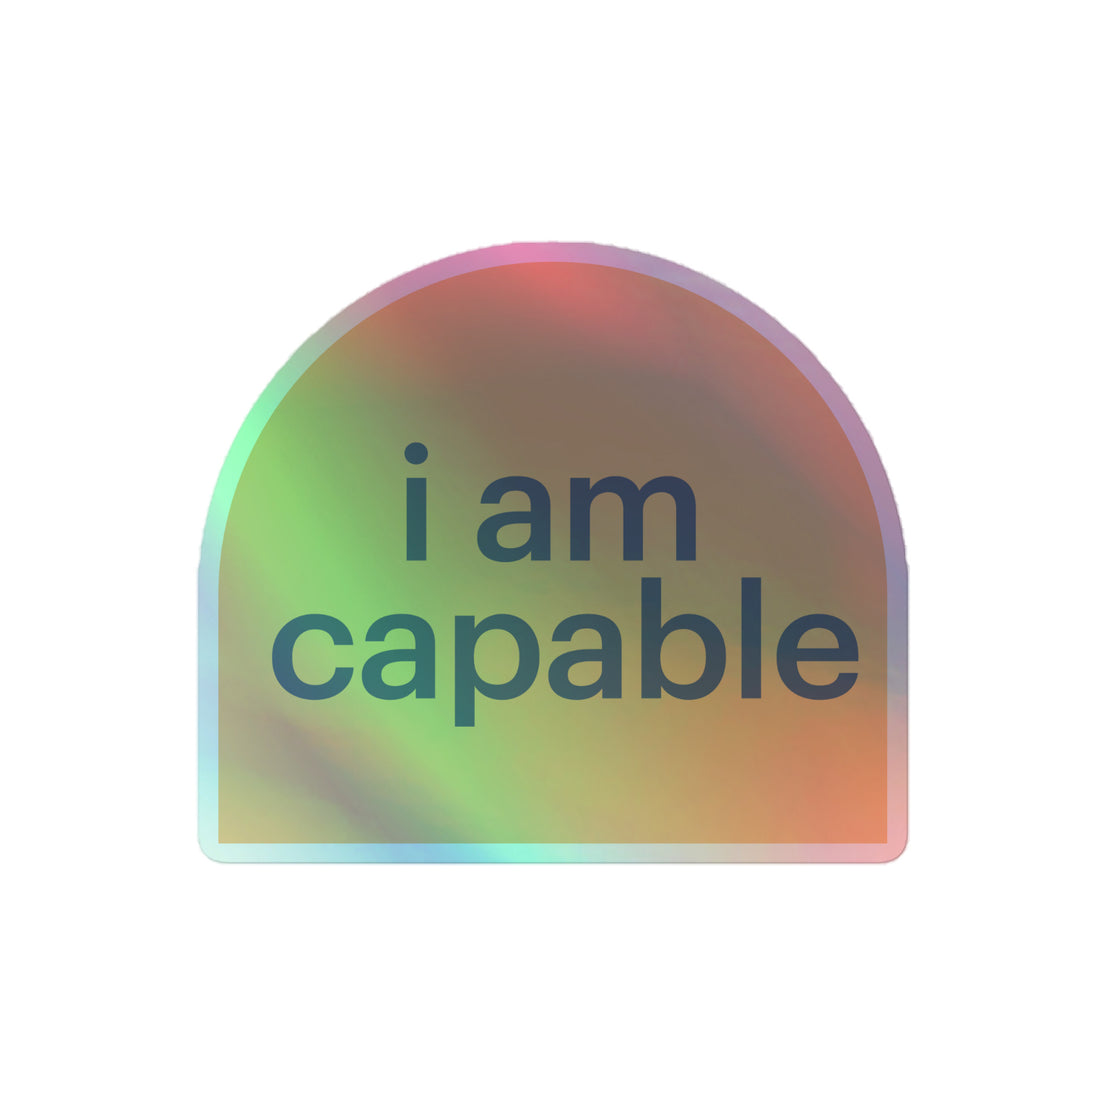 Guidepost Promo - I am capable Holographic stickers